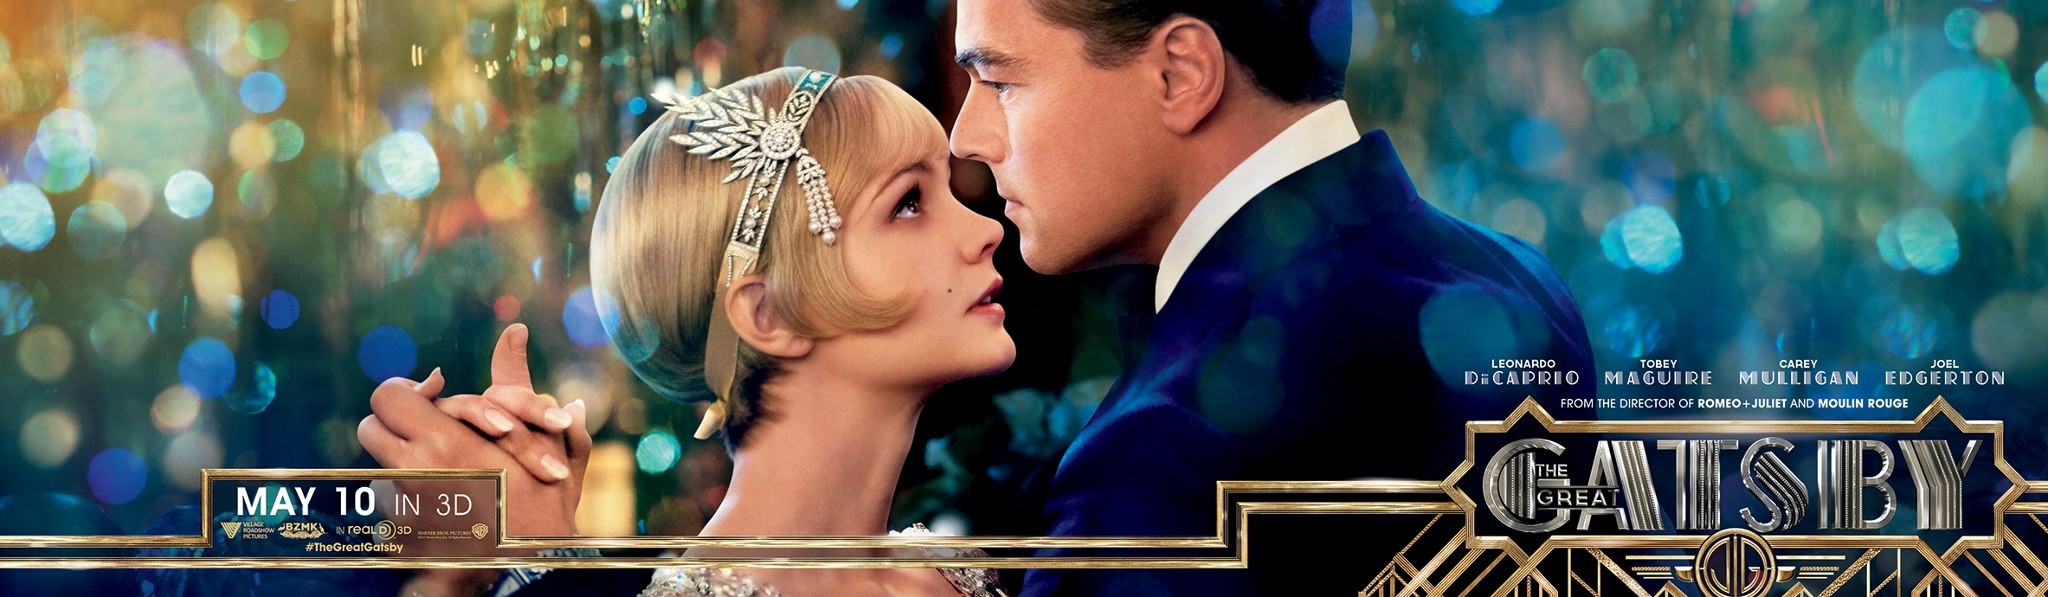 Mega Sized Movie Poster Image for The Great Gatsby (#21 of 24)